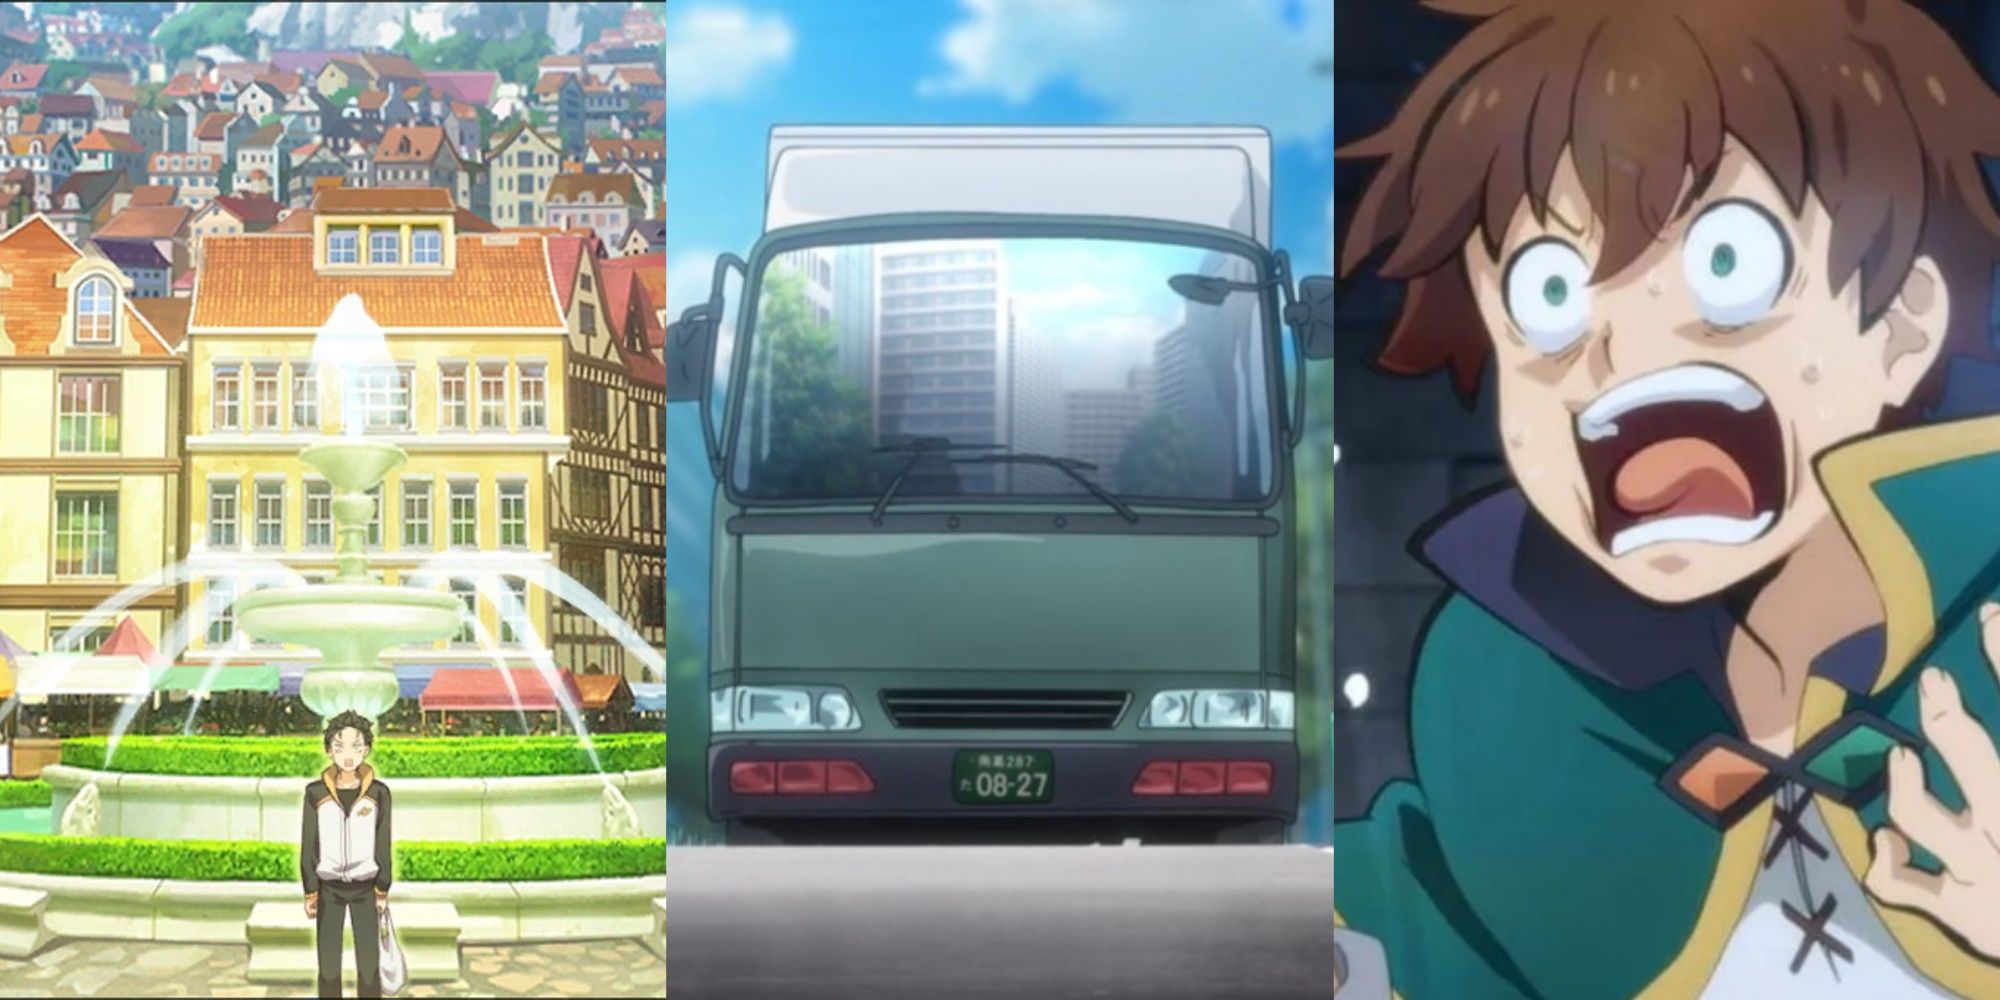 Featured Image with Kazuma from Konosuba panicking, truck and subaru from Re : zero standing from right to left